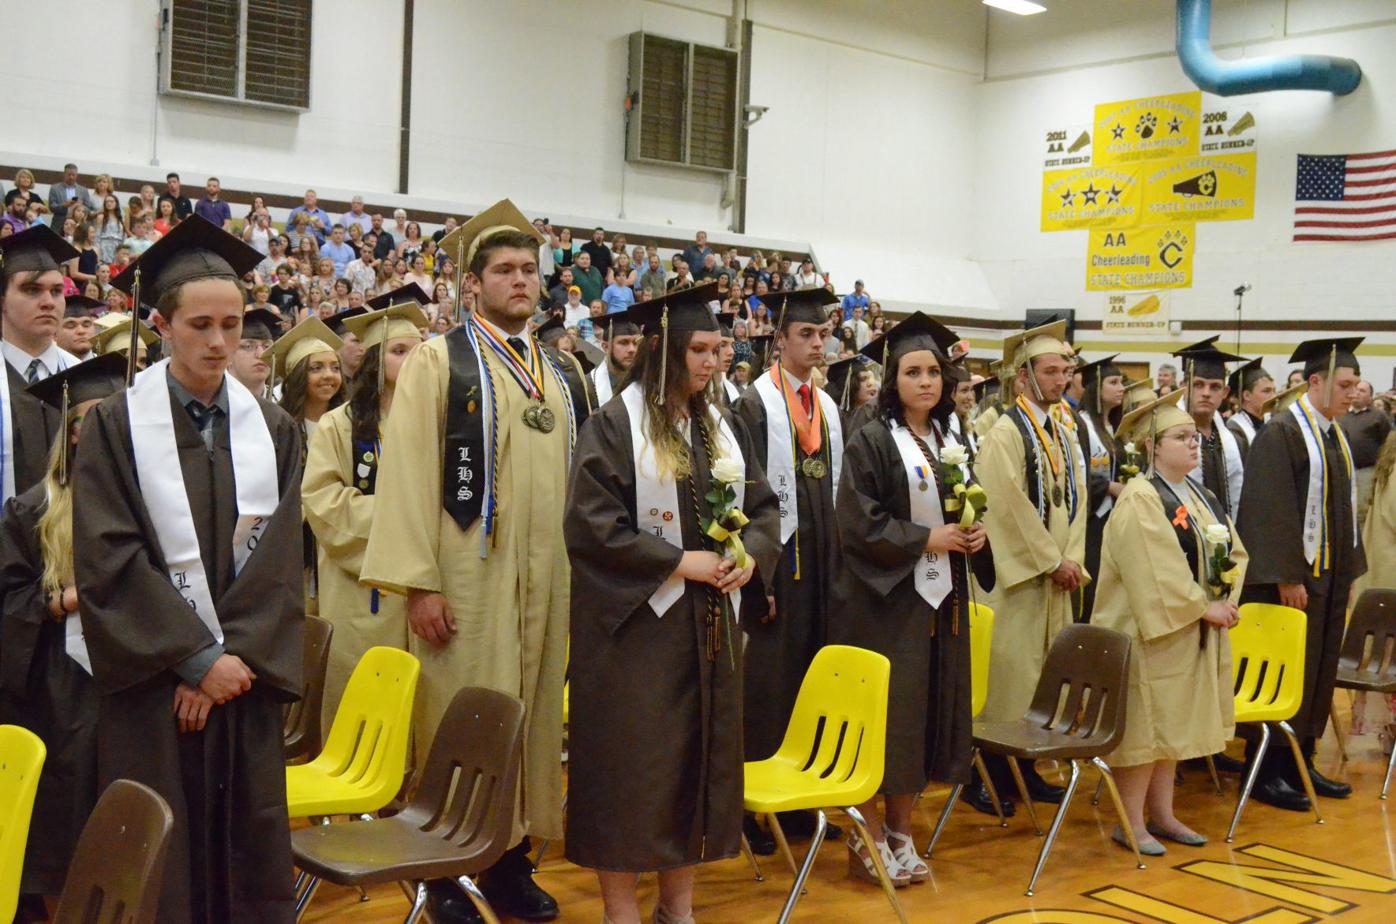 Lincoln graduates remember the past, look to future News